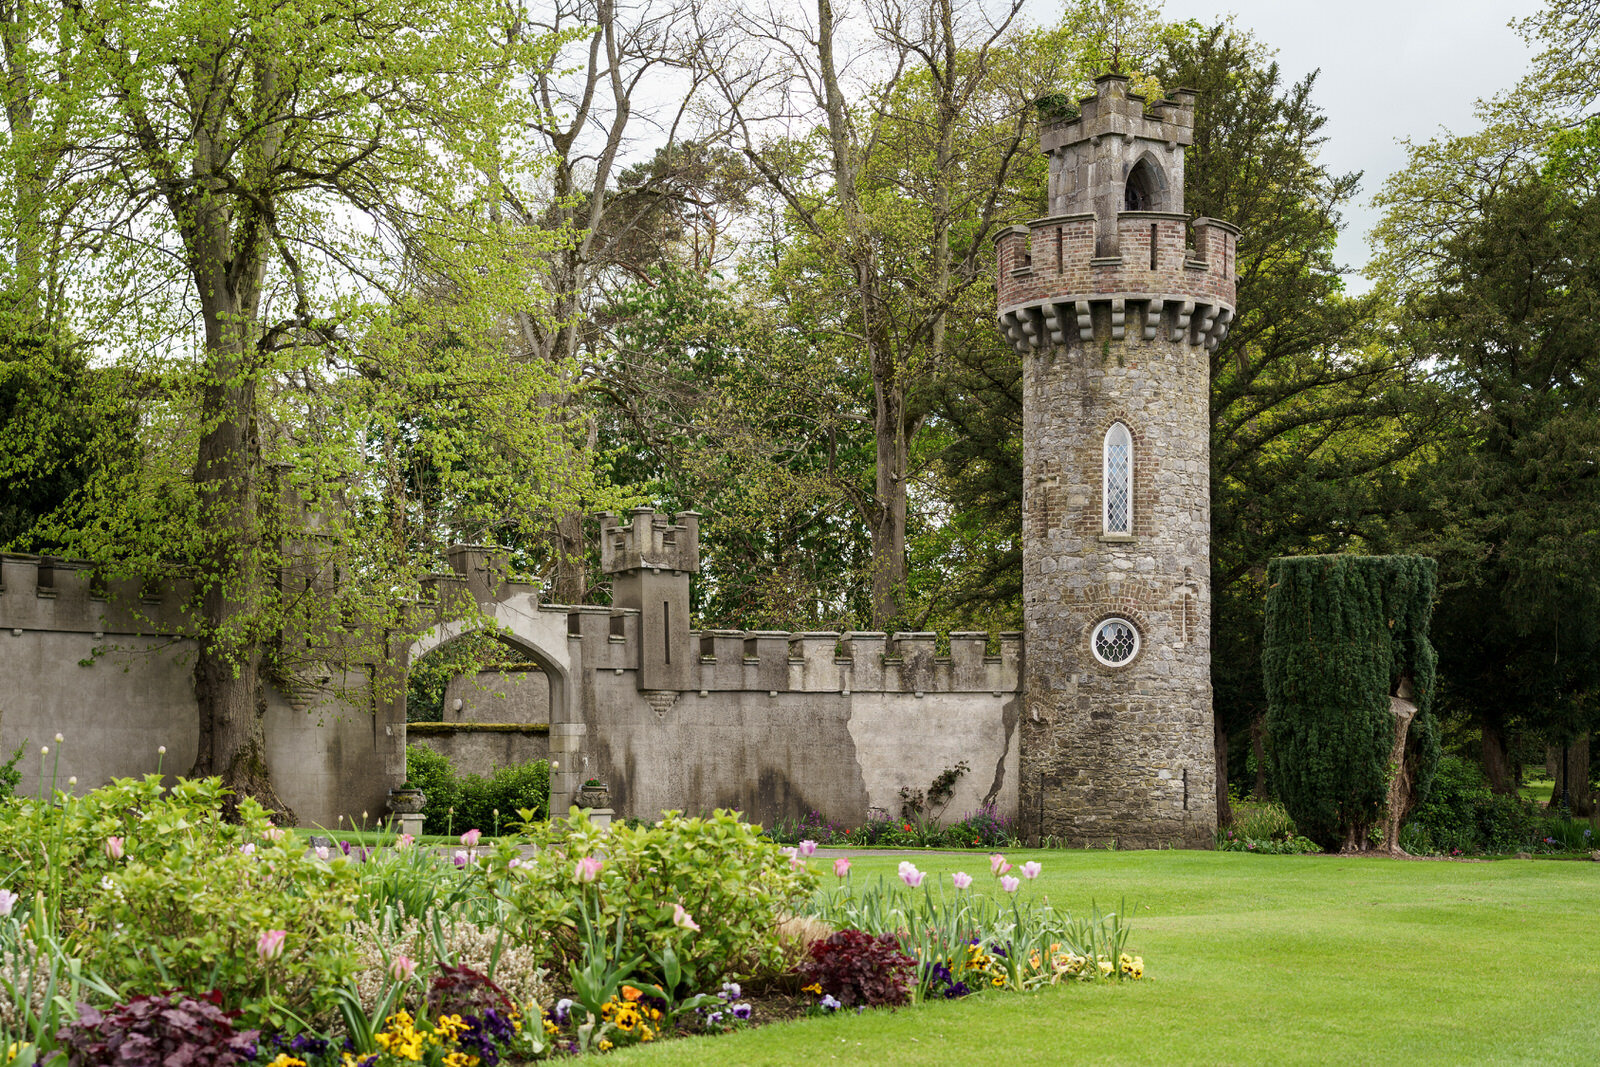  Luttrelstown Castle Dublin Ireland Incentive travel group photography by Roger Kenny 